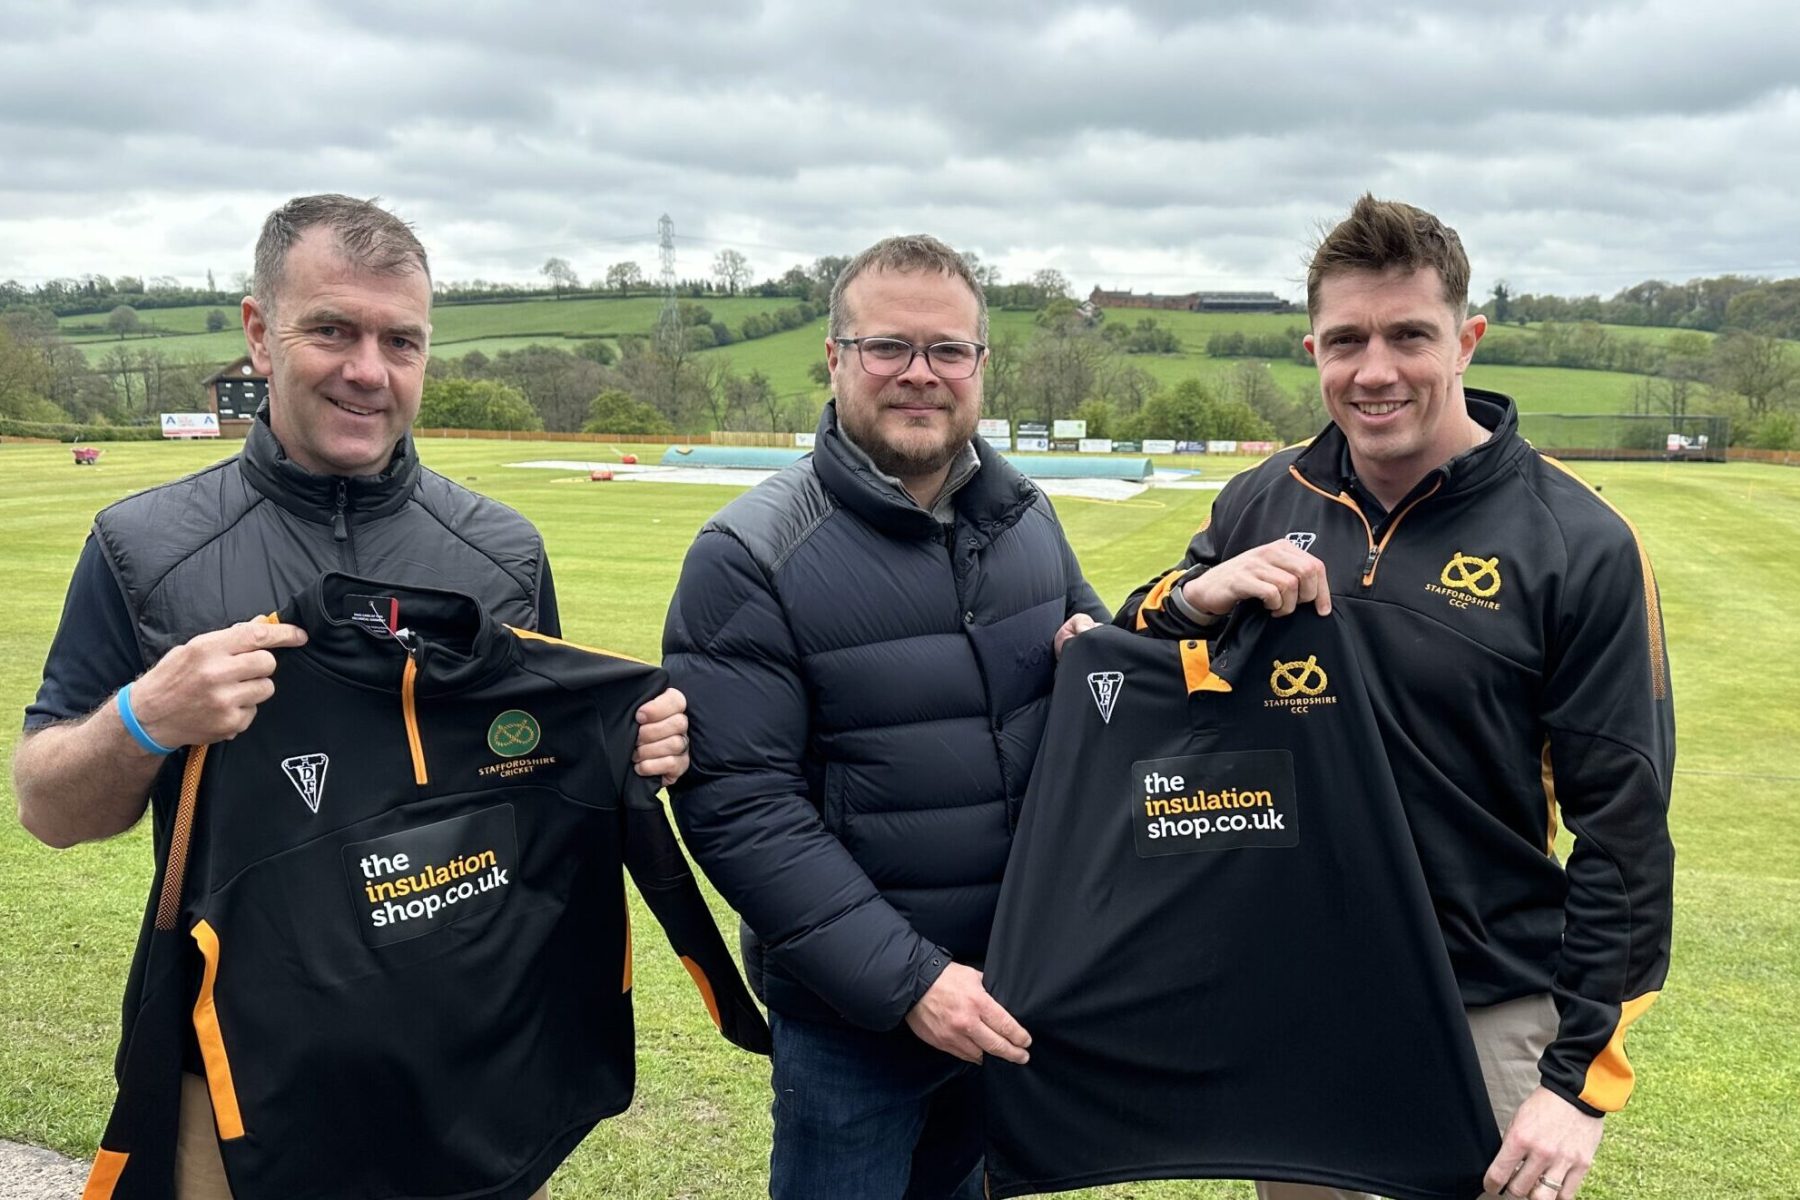 Staffordshire County Cricket Club head coach Andy Carr and captain James Kettleborough with John Stephenson from theinsulationshop